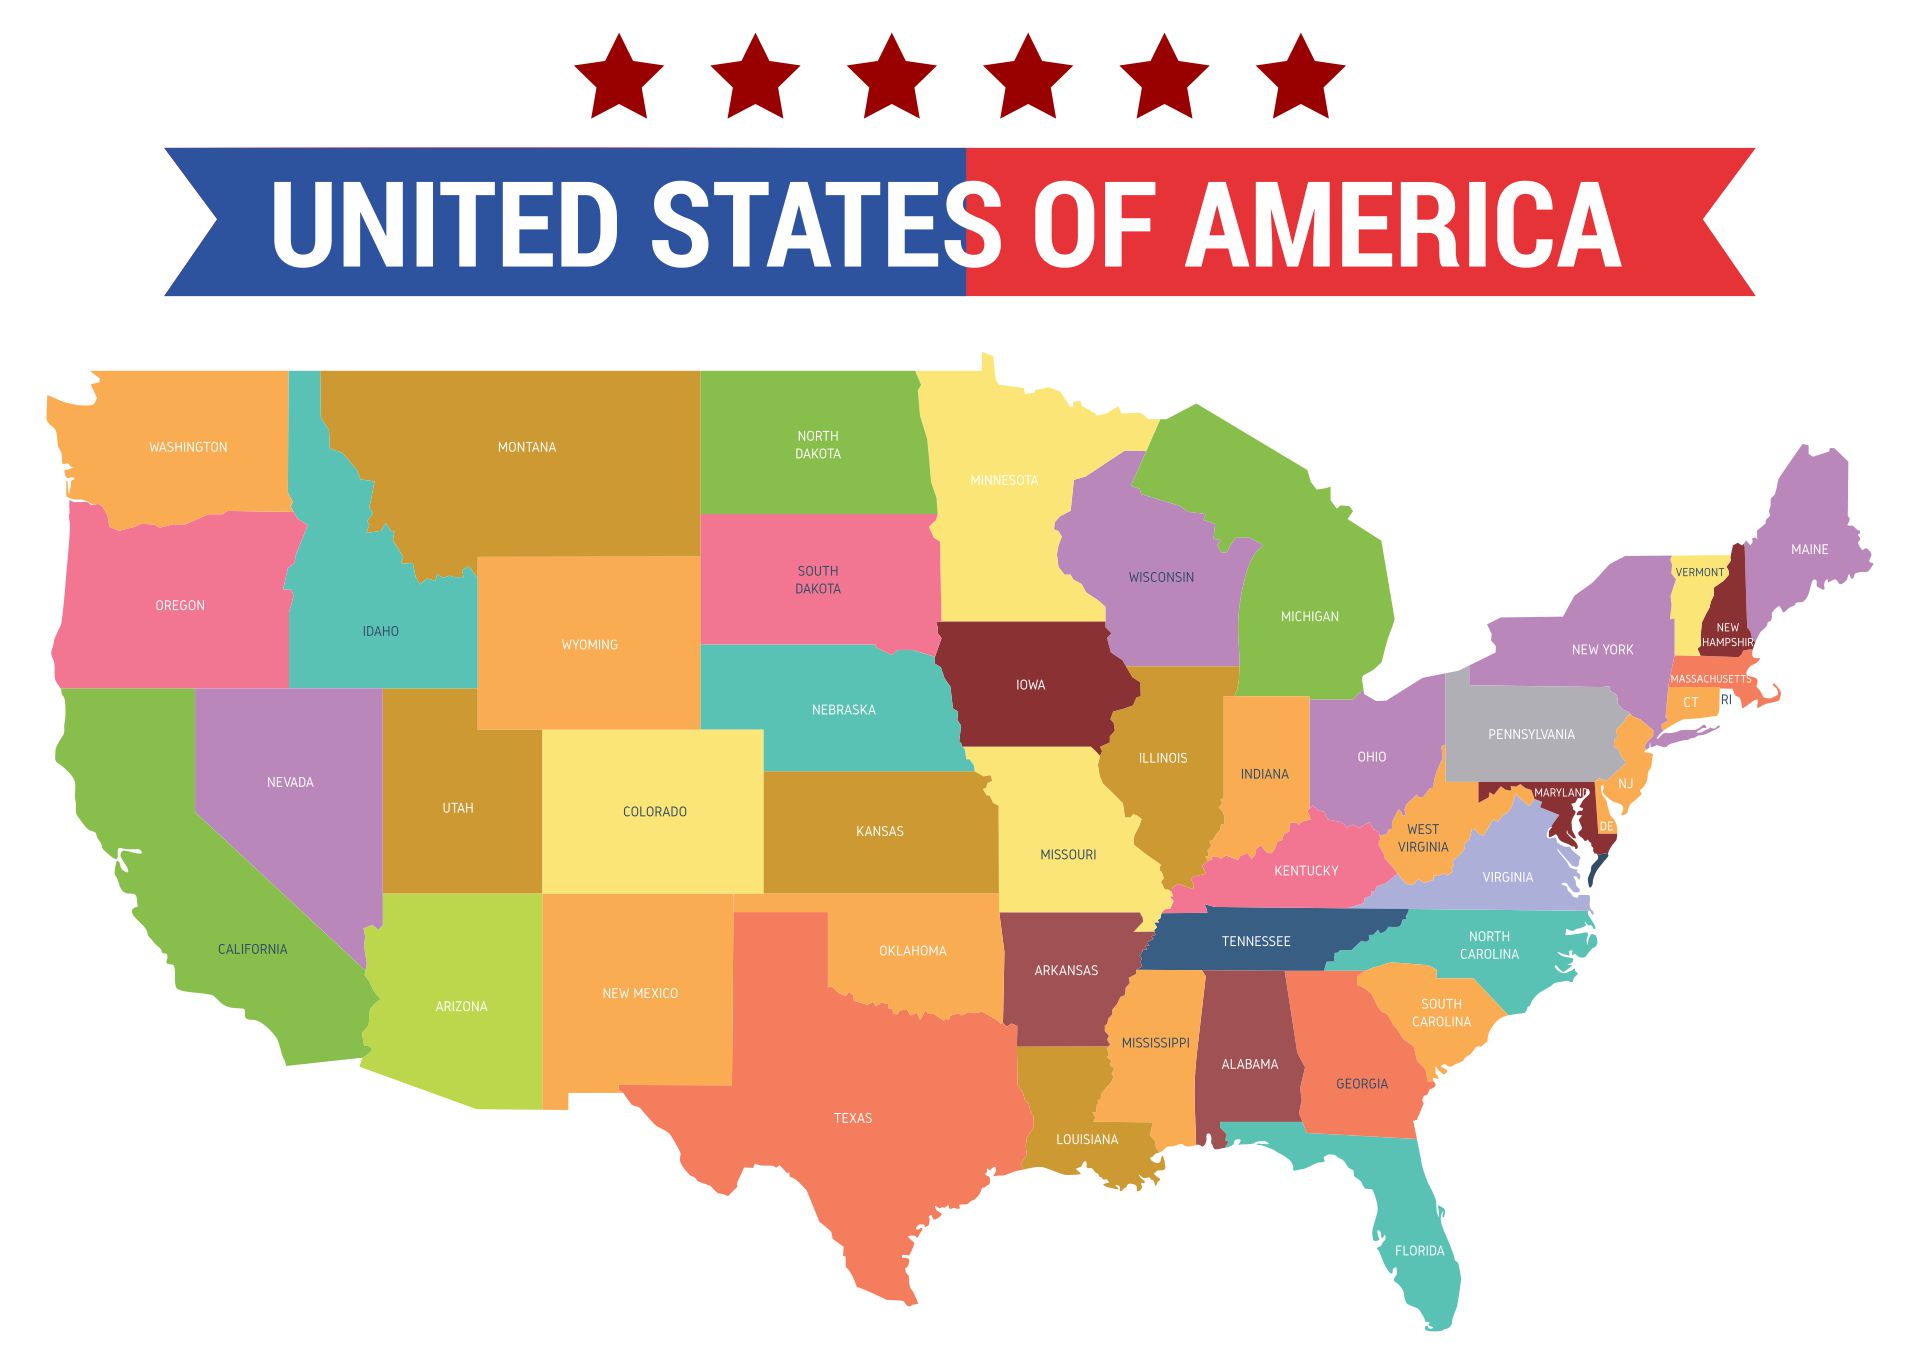 4-best-images-of-printable-usa-maps-united-states-colored-free